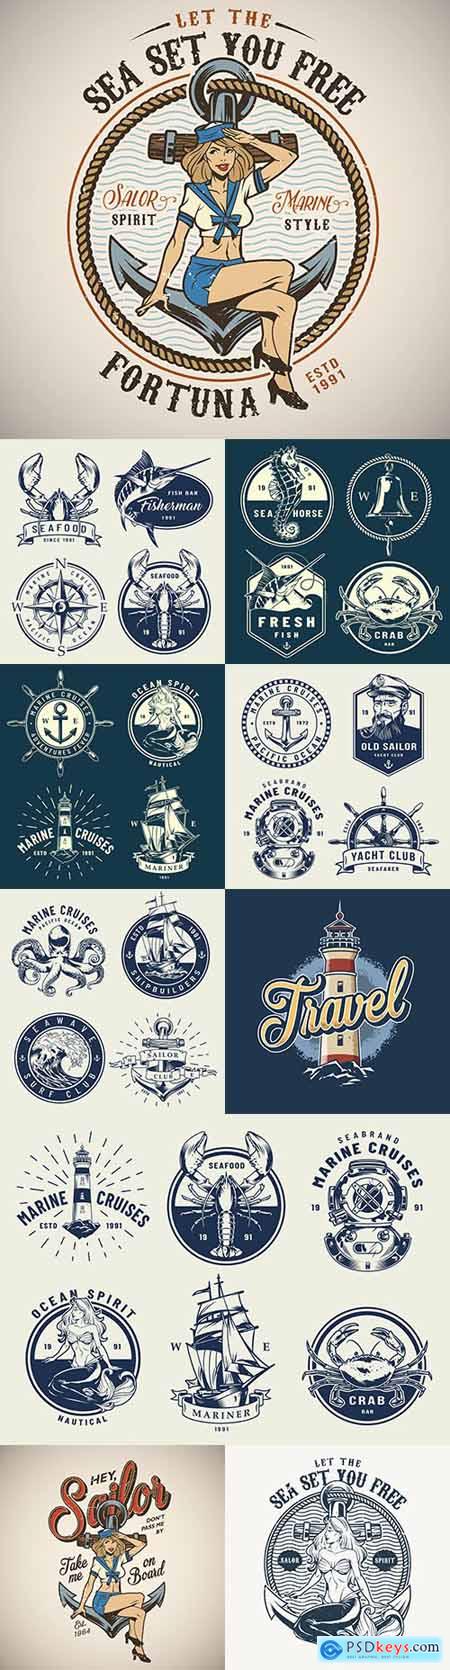 Vintage sea emblems and logos design collection